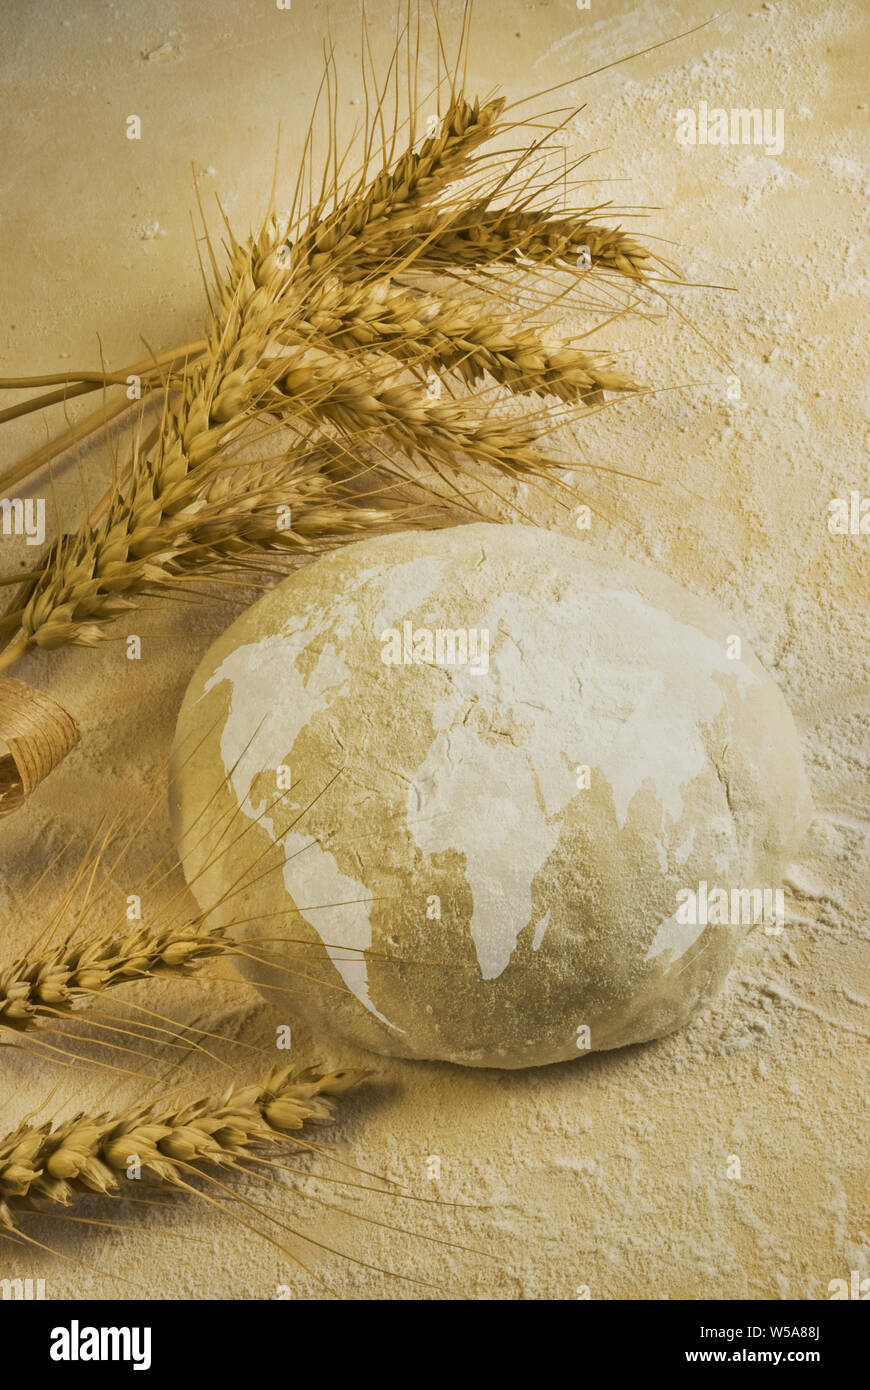 conceptual.Flour dough and water form a ball on which a map of the world is drawn and some ears of wheat on the table Stock Photo